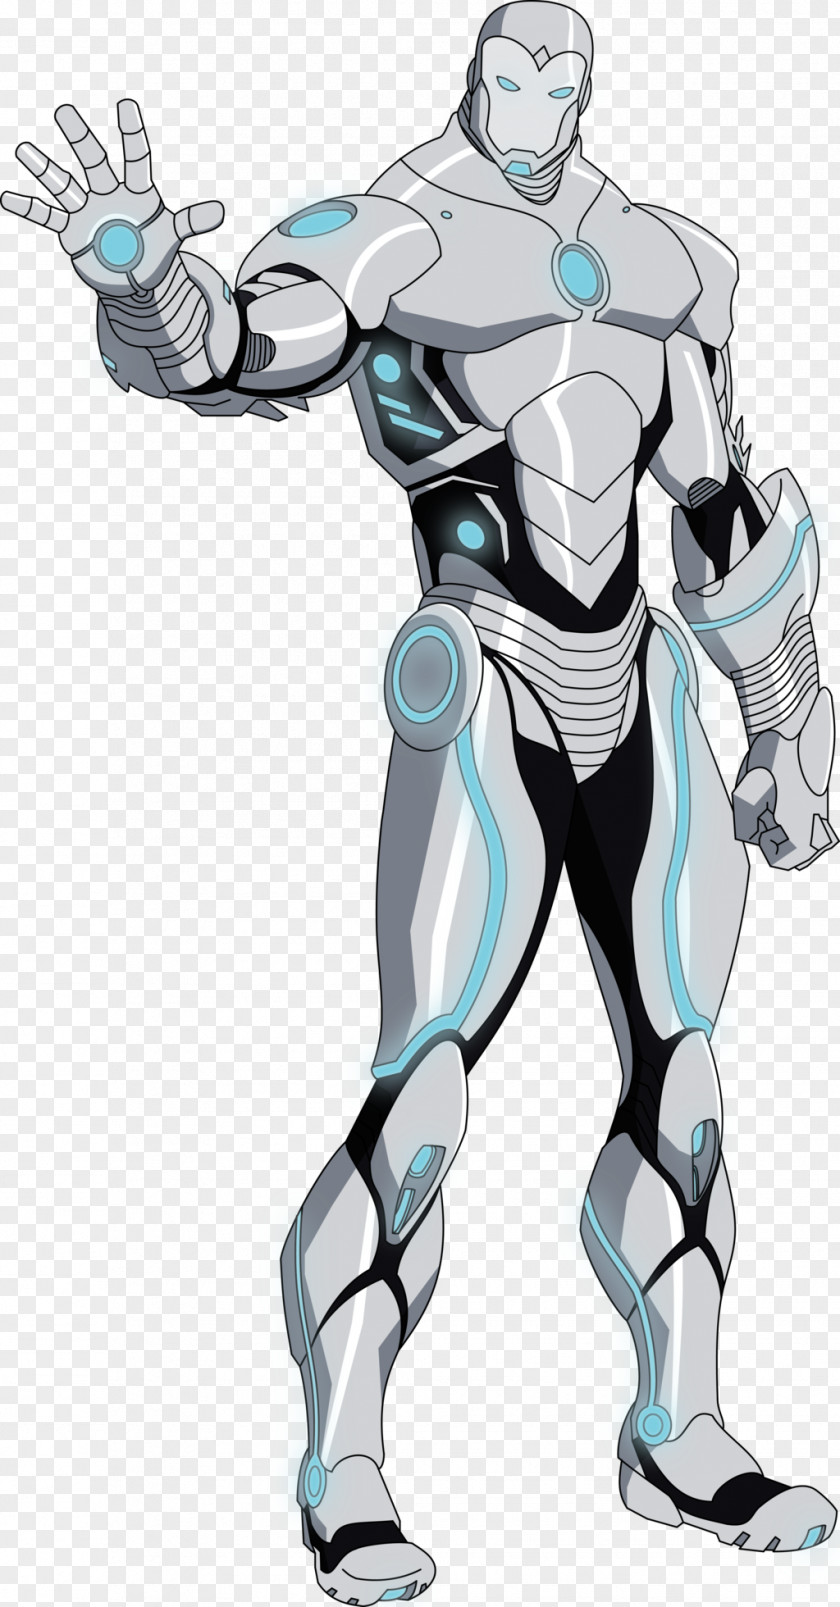 Ironman Iron Man's Armor Extremis Spider-Man Edwin Jarvis PNG